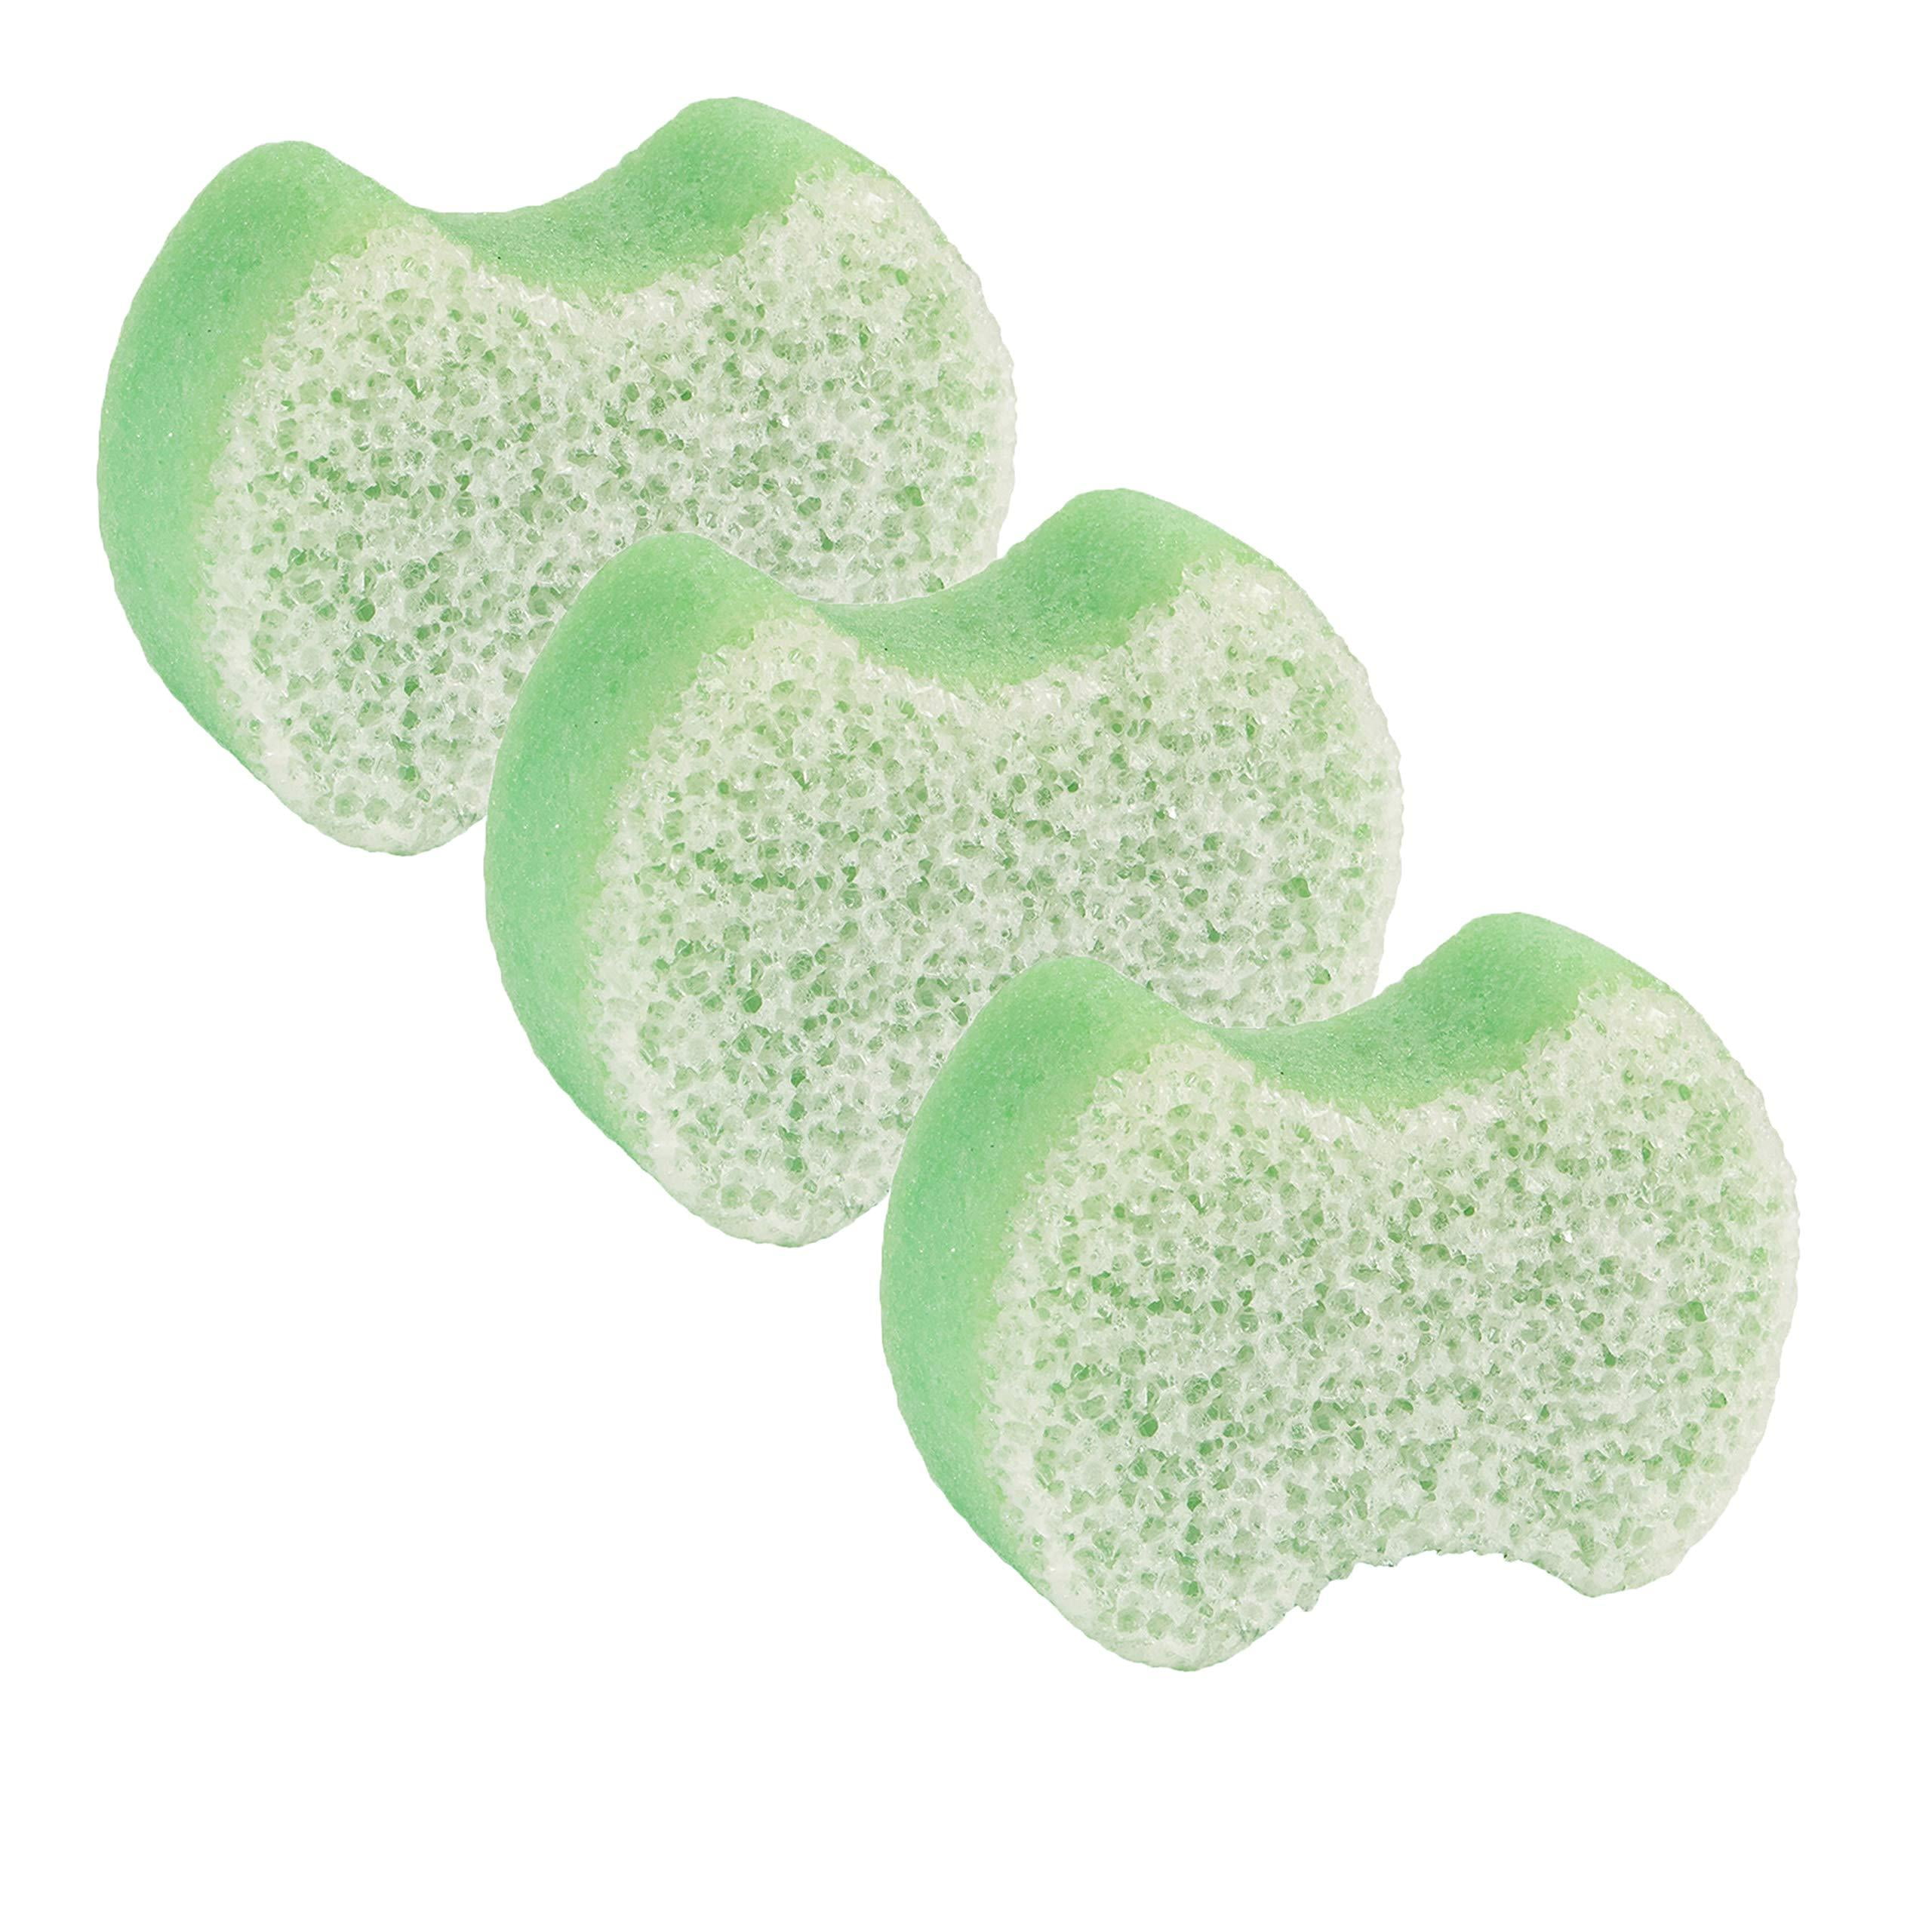  Spongeables Foot Scrubber Sponge With Shea Butter And